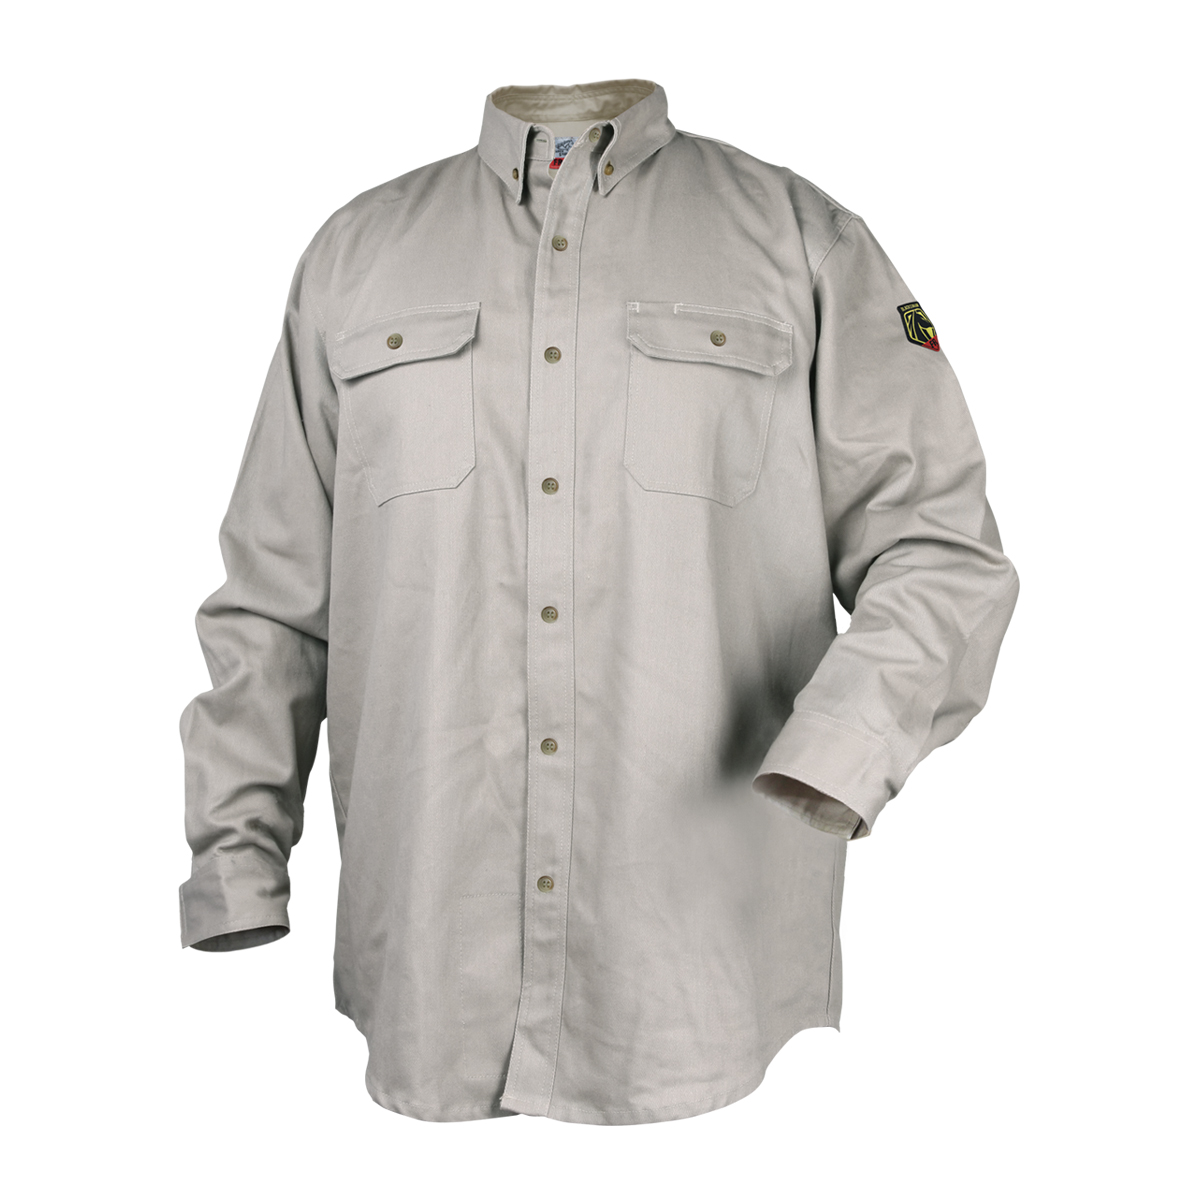 FR COTTON STONE WORK SHIRT WITH SILVER REFLECTIVE